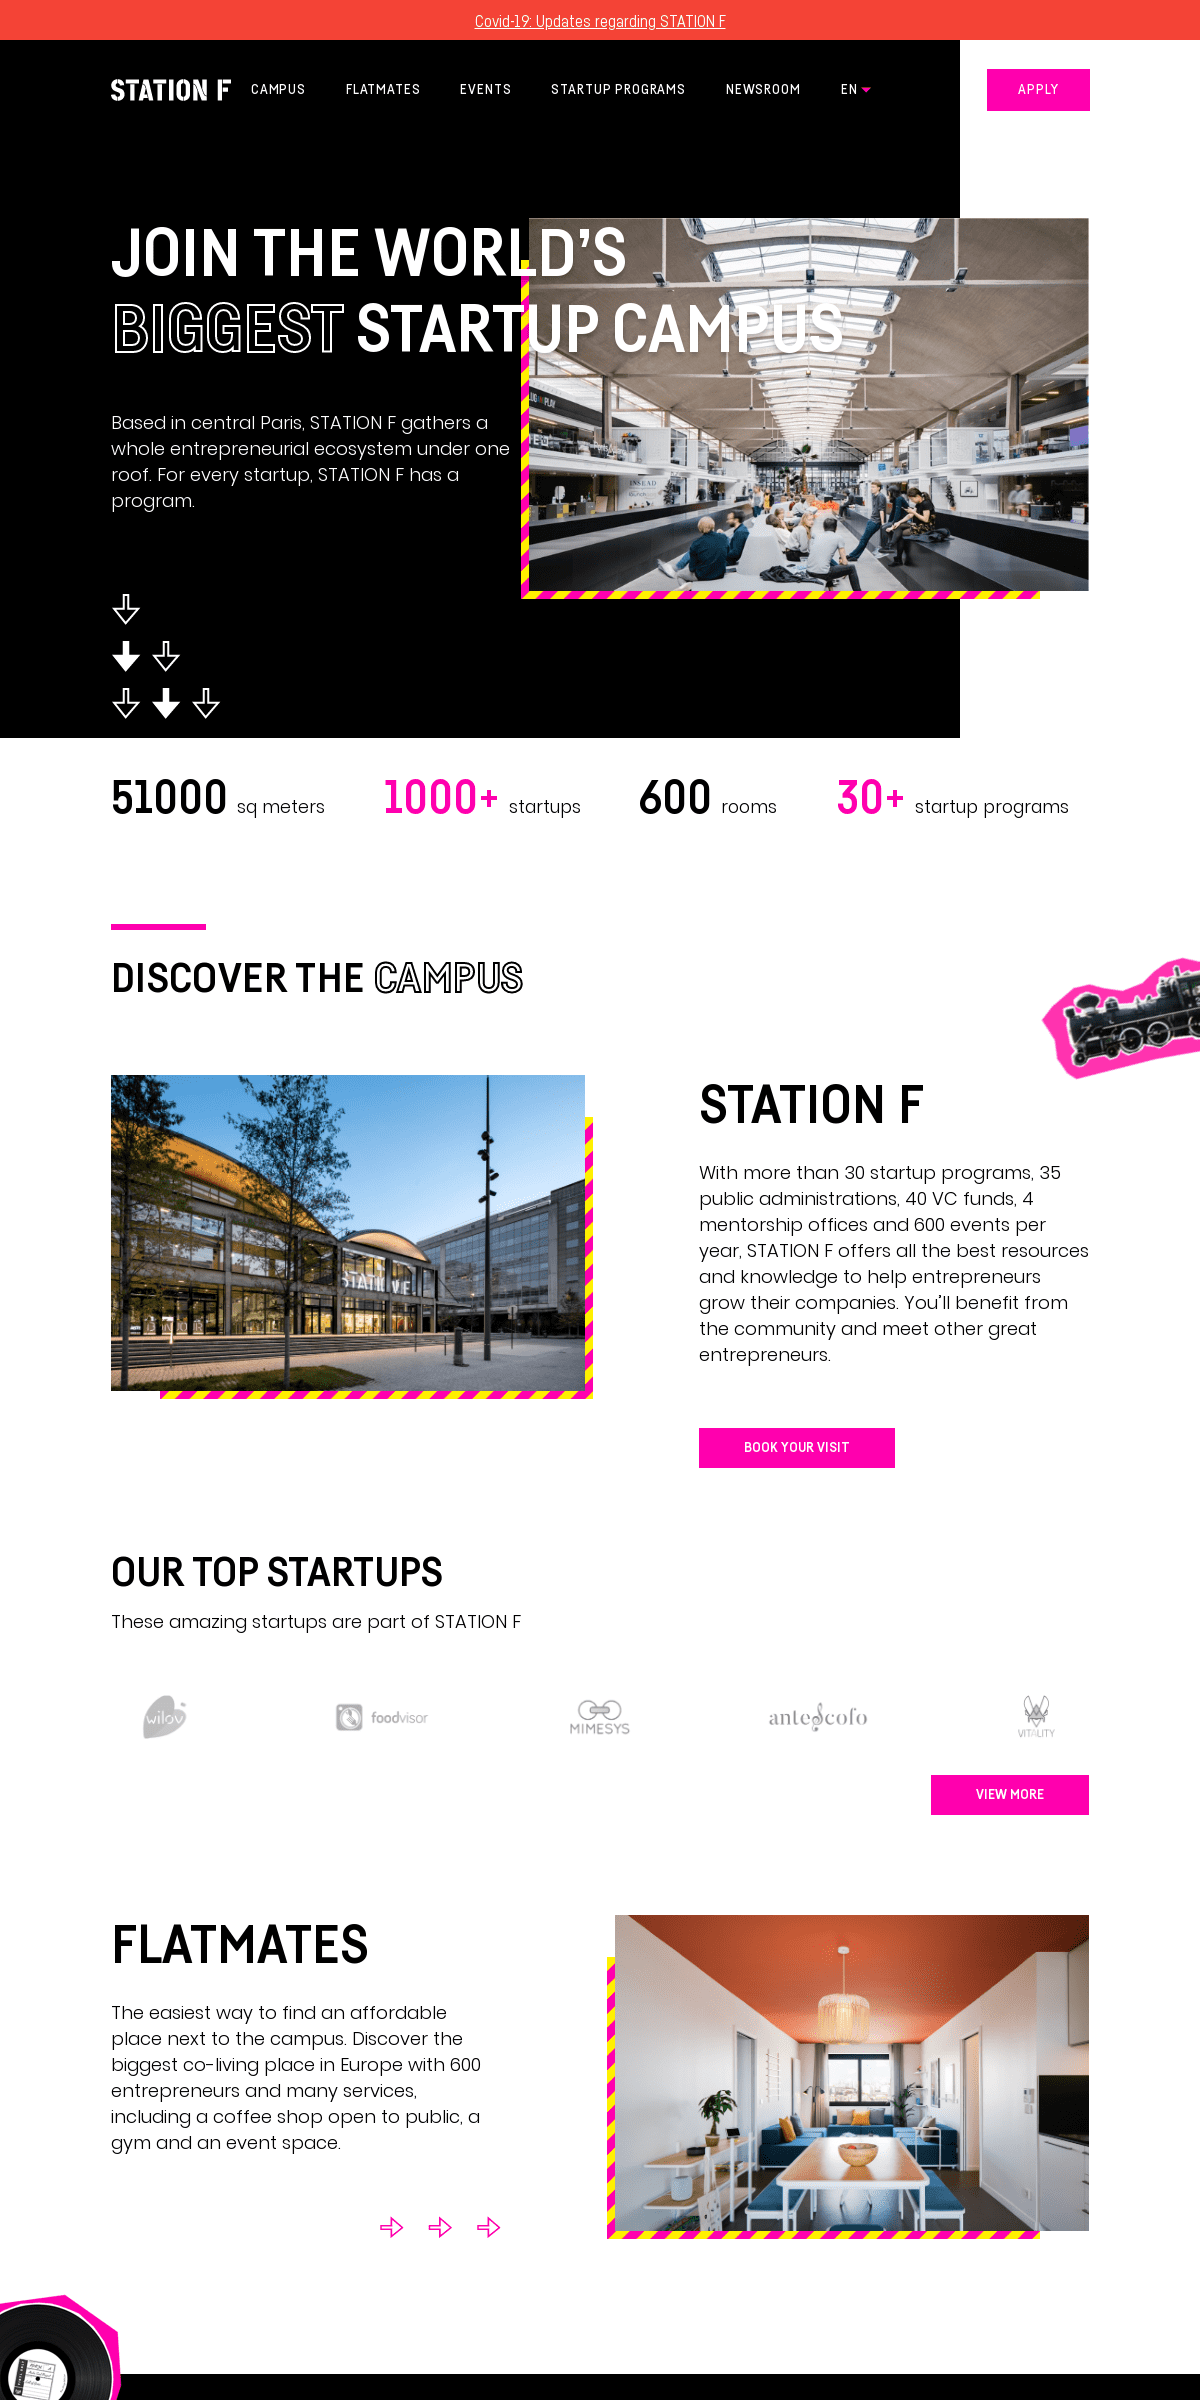 A complete backup of stationf.co